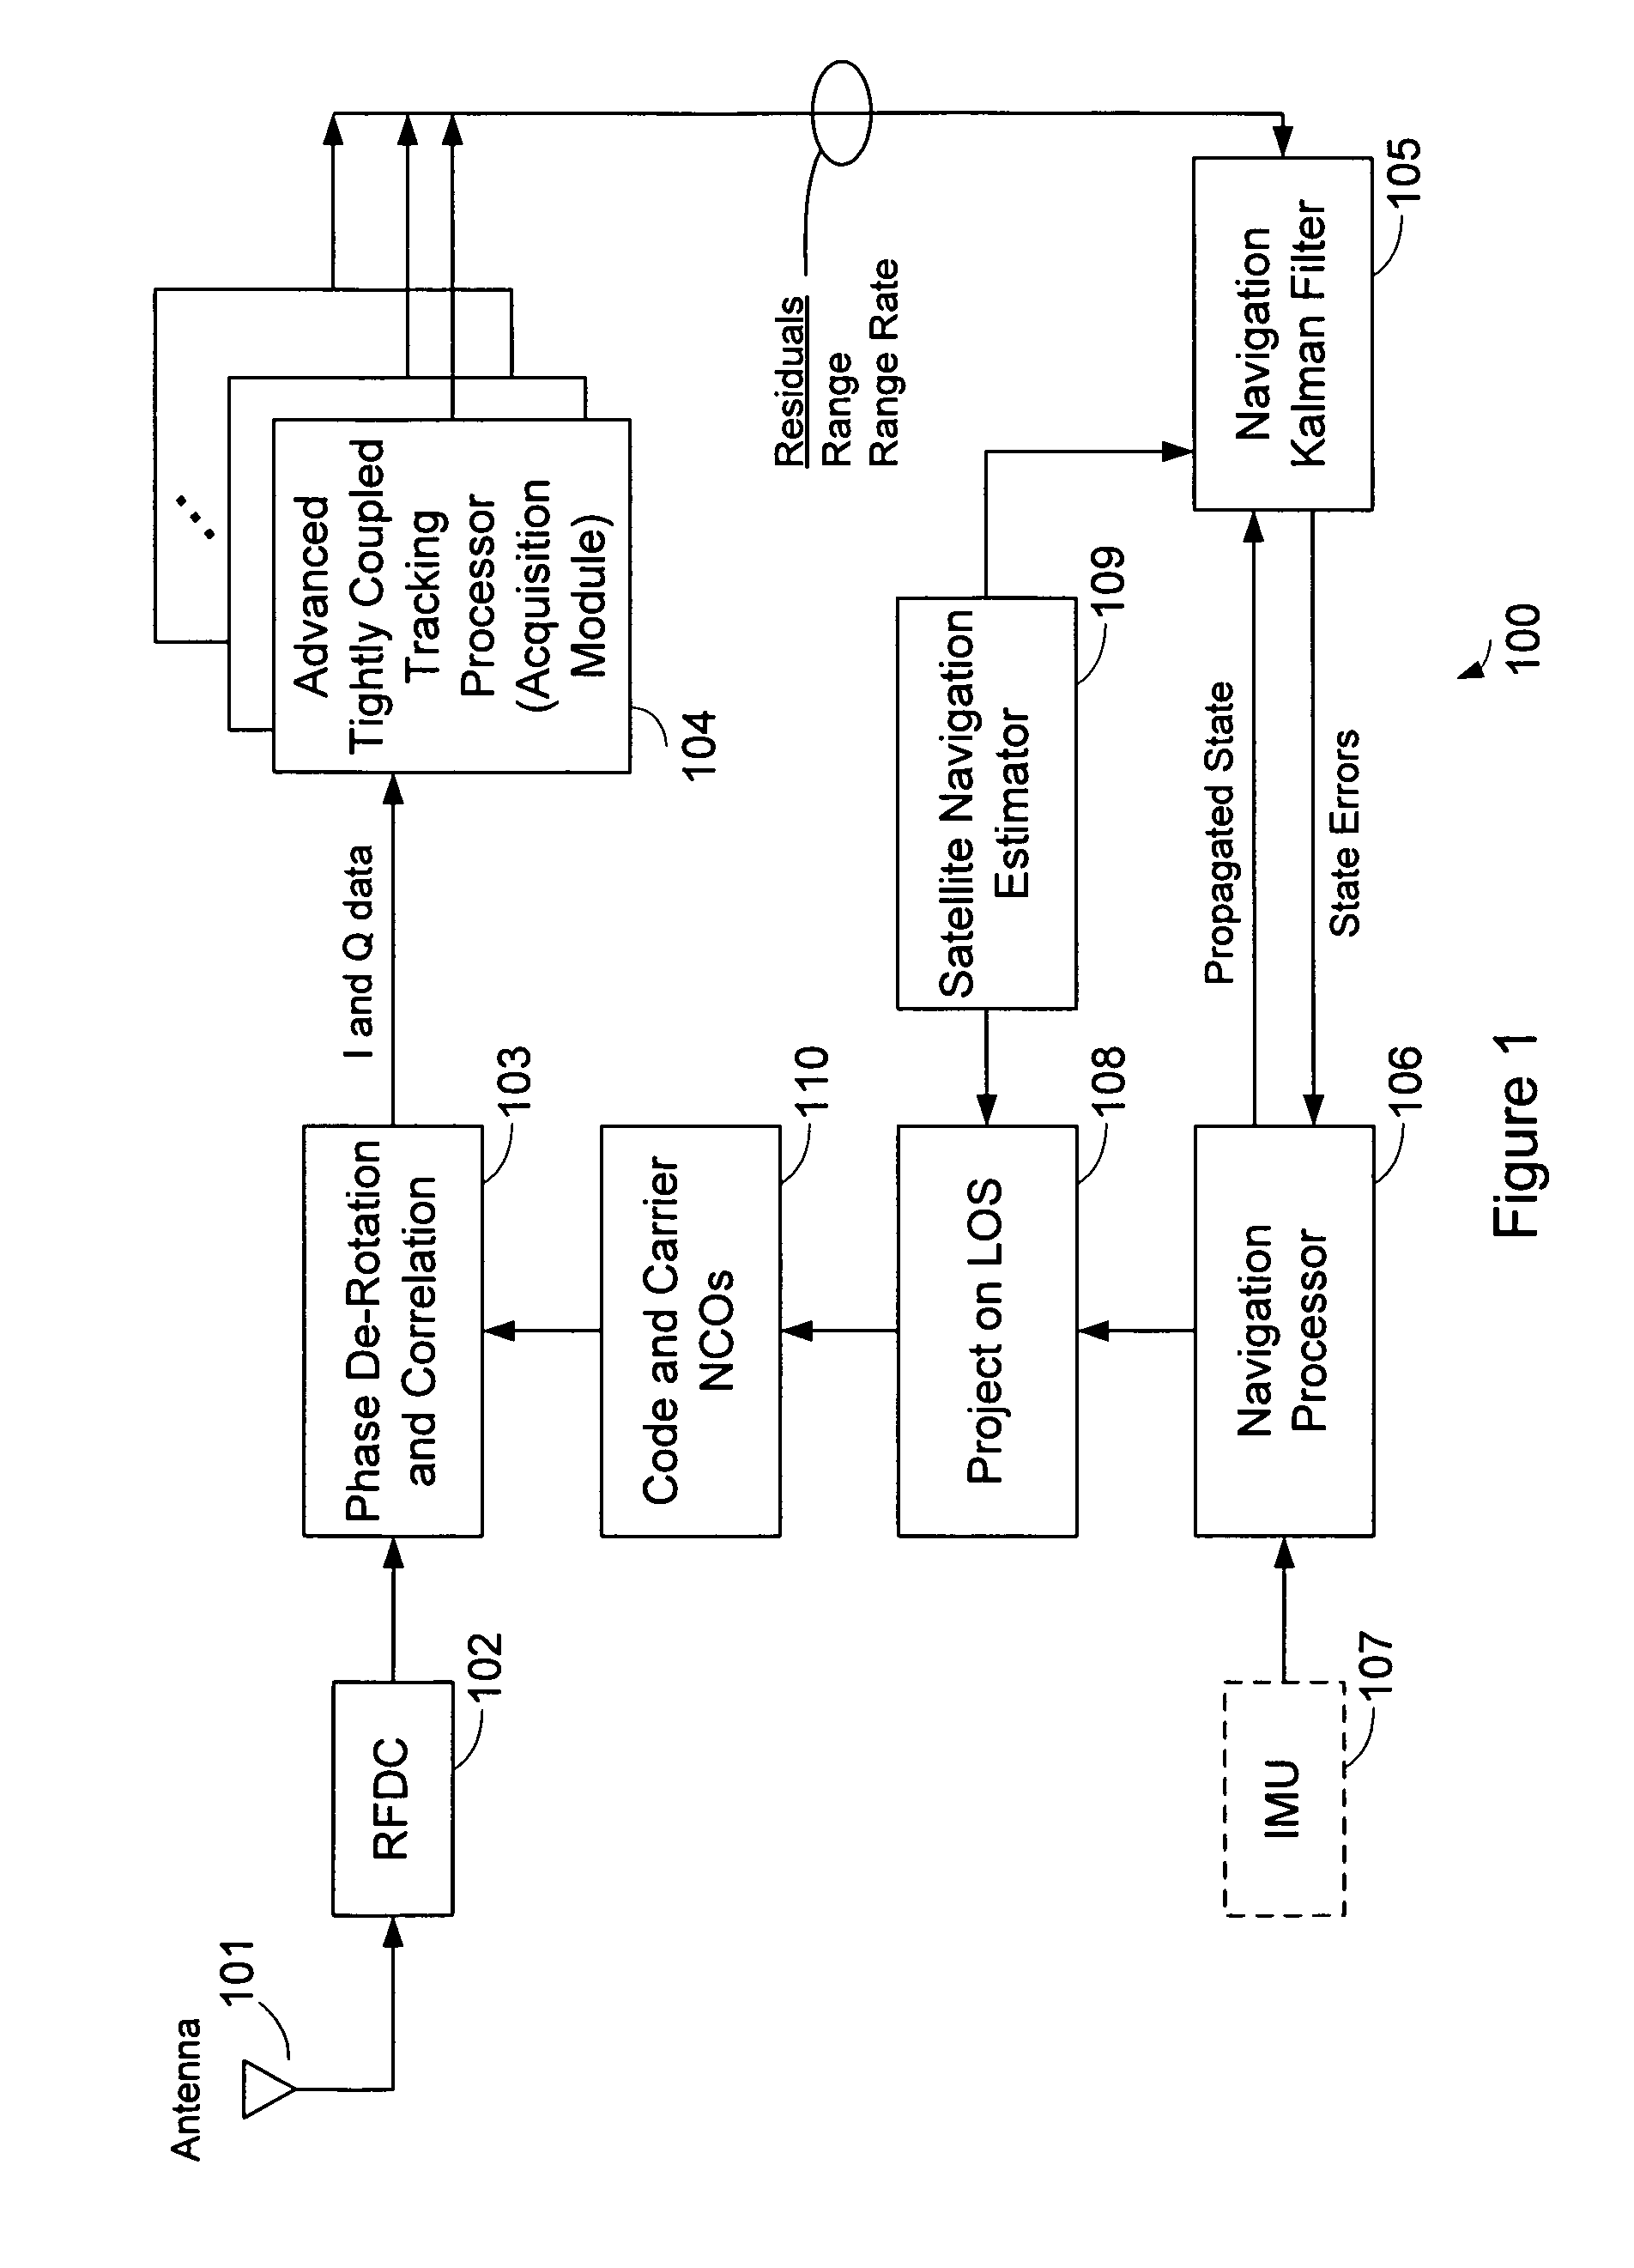 System and method for GPS acquisition using advanced tight coupling